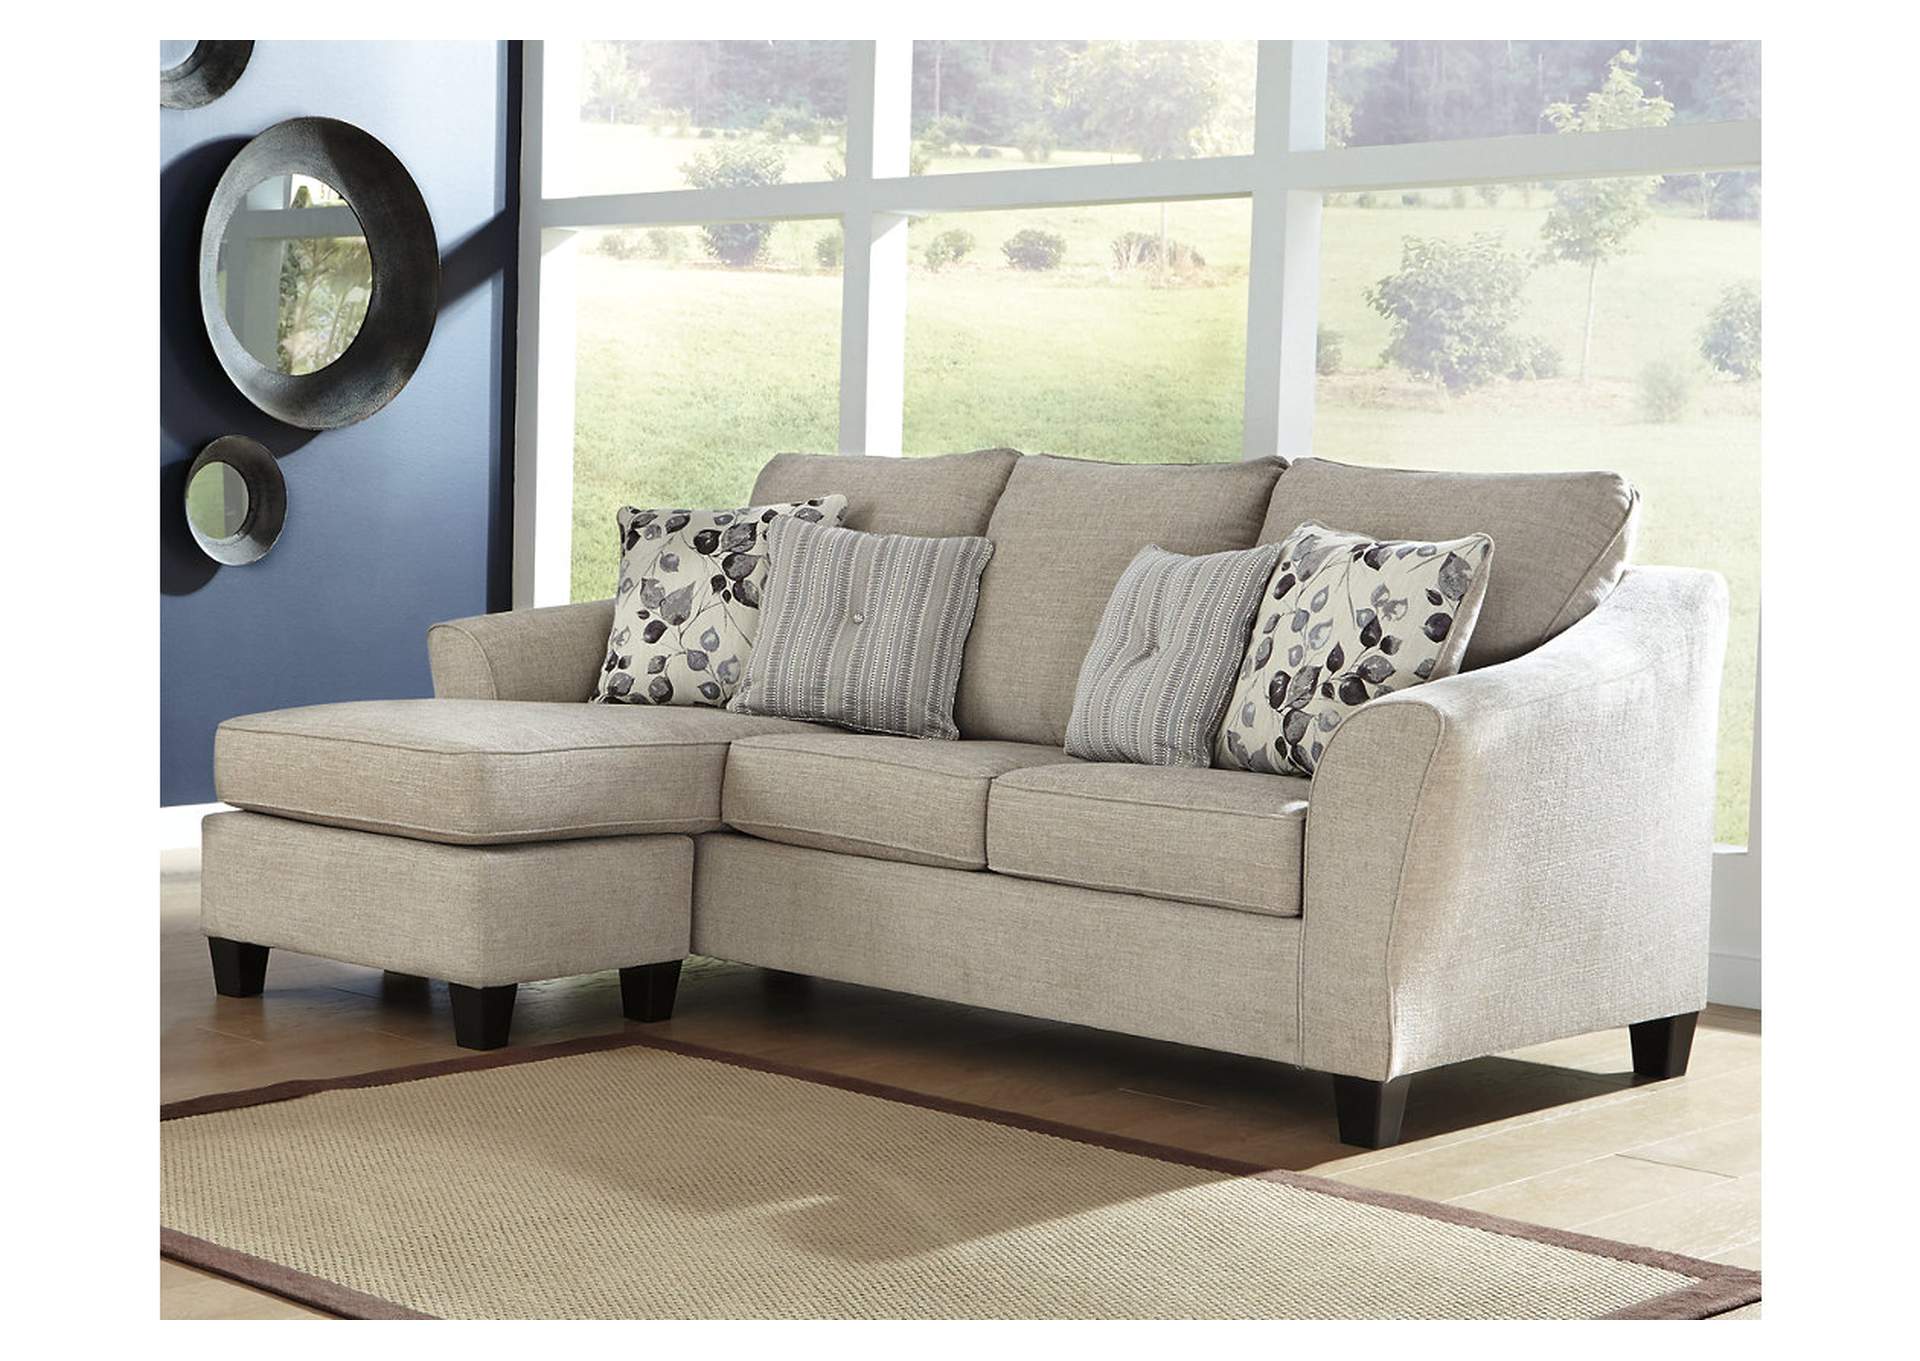 Abney Sofa Chaise, Chair, and Ottoman,Benchcraft